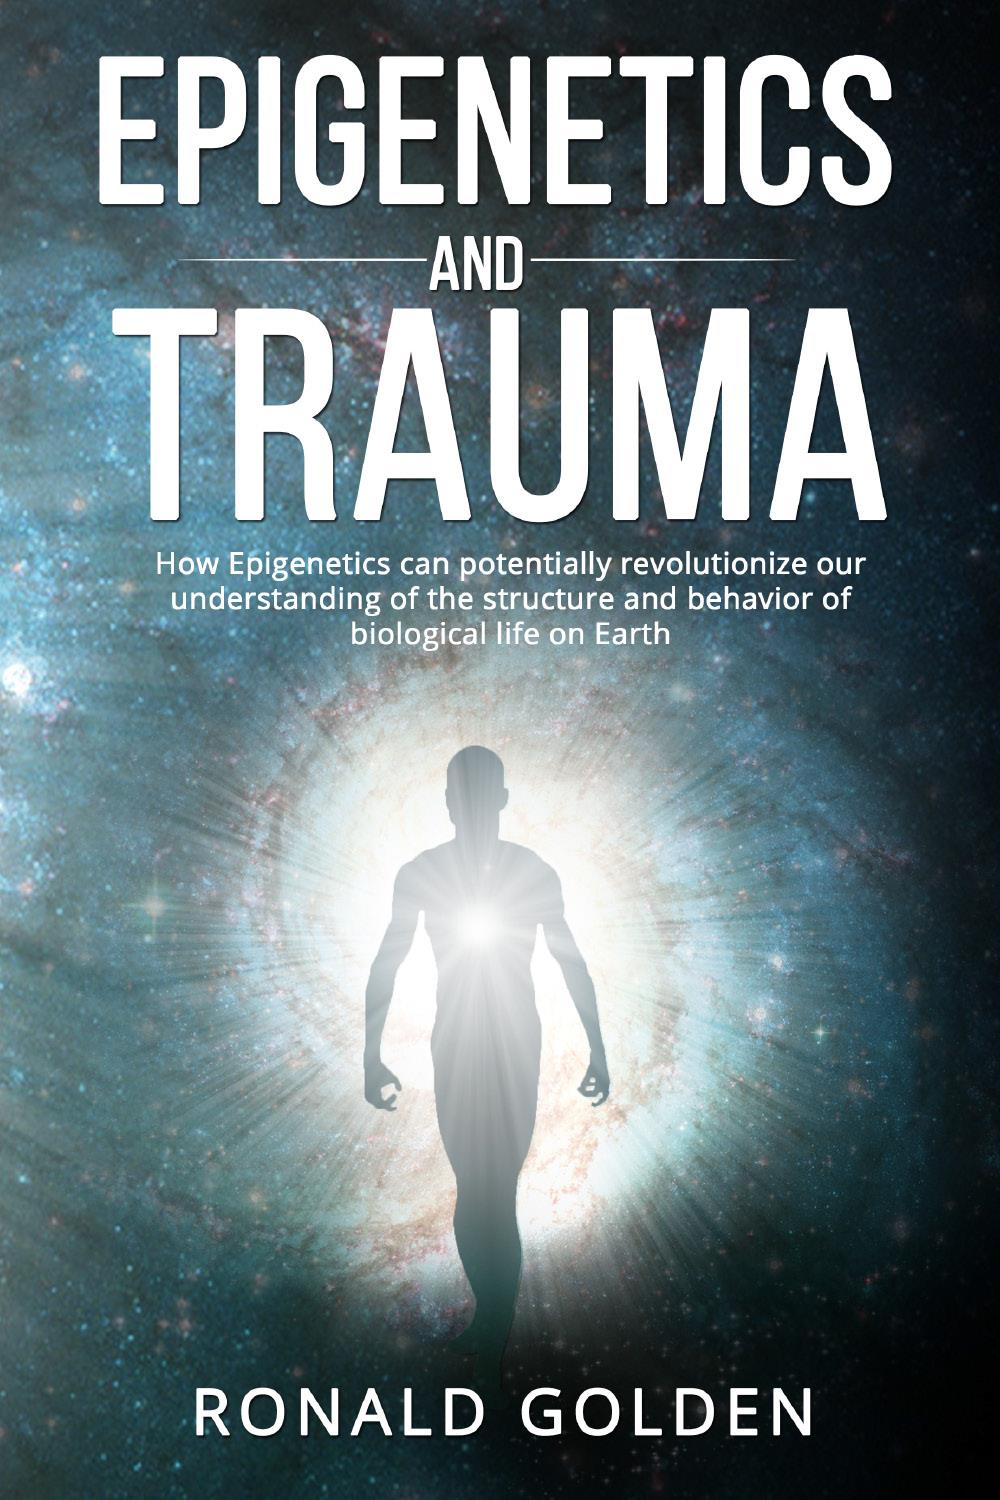 Epigenetics and Trauma. How Epigenetics can potentially revolutionize our understanding of the structure and behavior of biological life on Earth